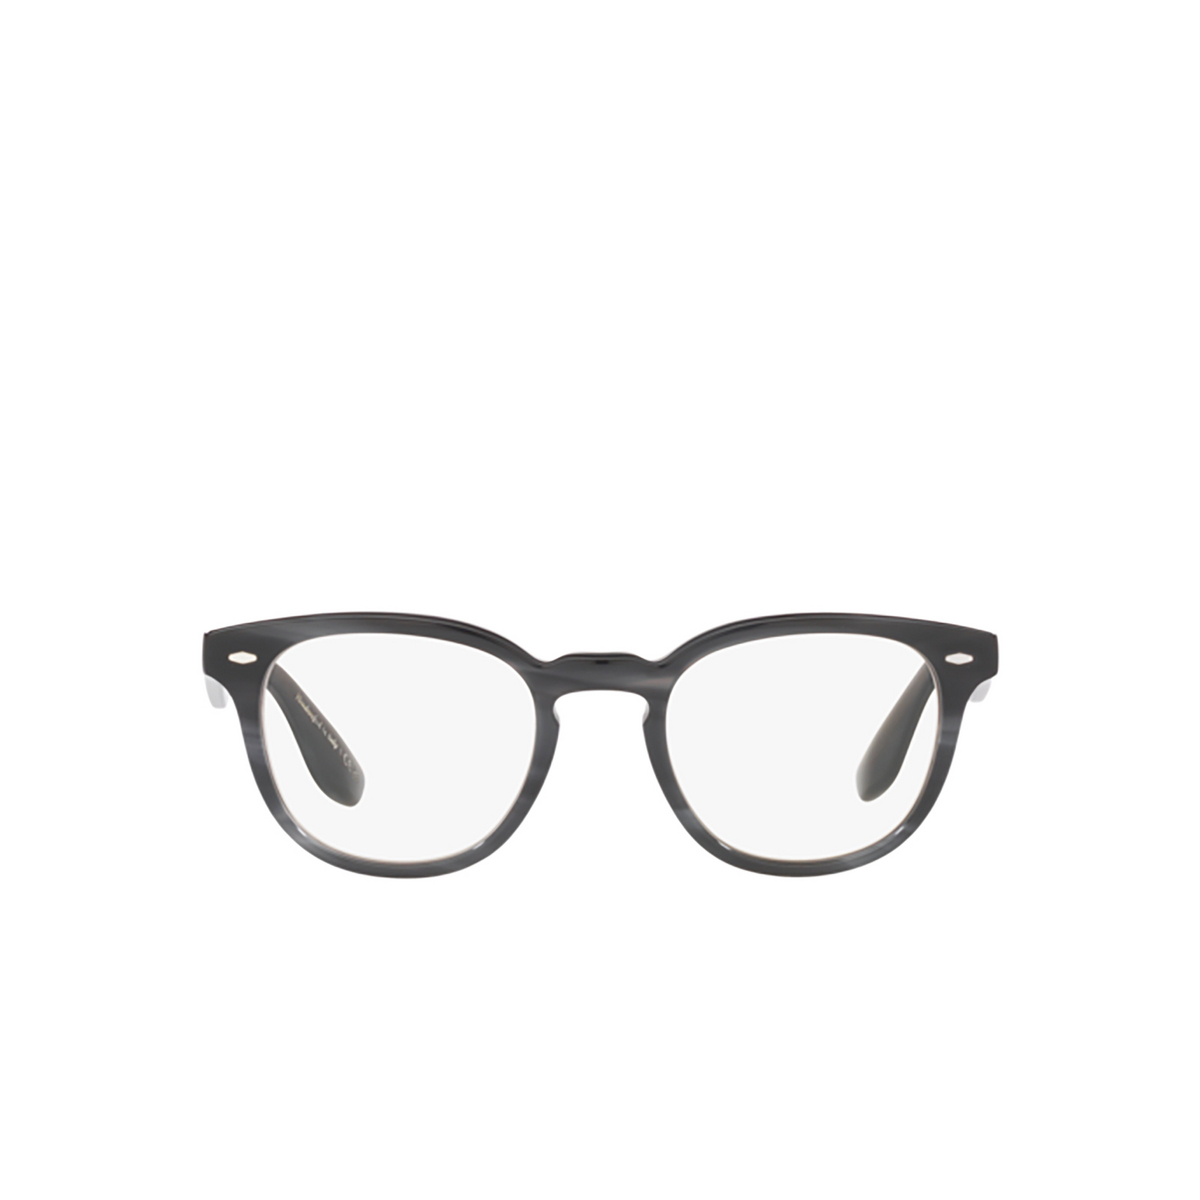 Oliver Peoples JEP-R Eyeglasses 1661 Charcoal tortoise - front view